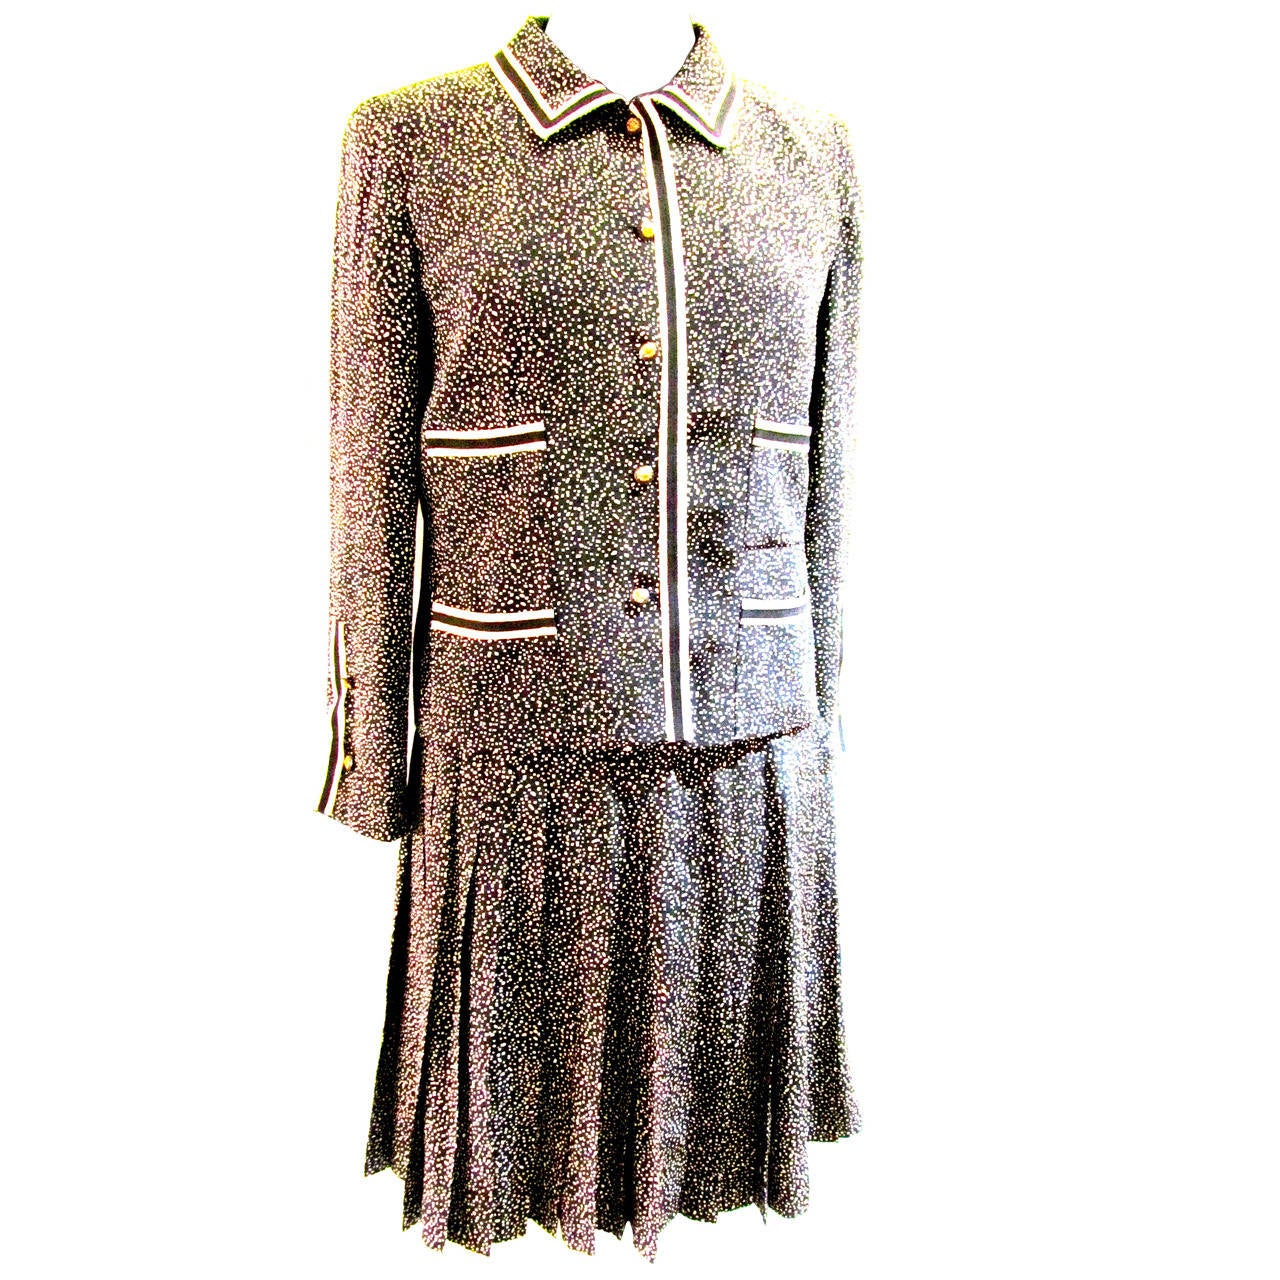 Chanel Silk Suit - Black and Cream Fabric with Iconic Lion Buttons - 1970's For Sale